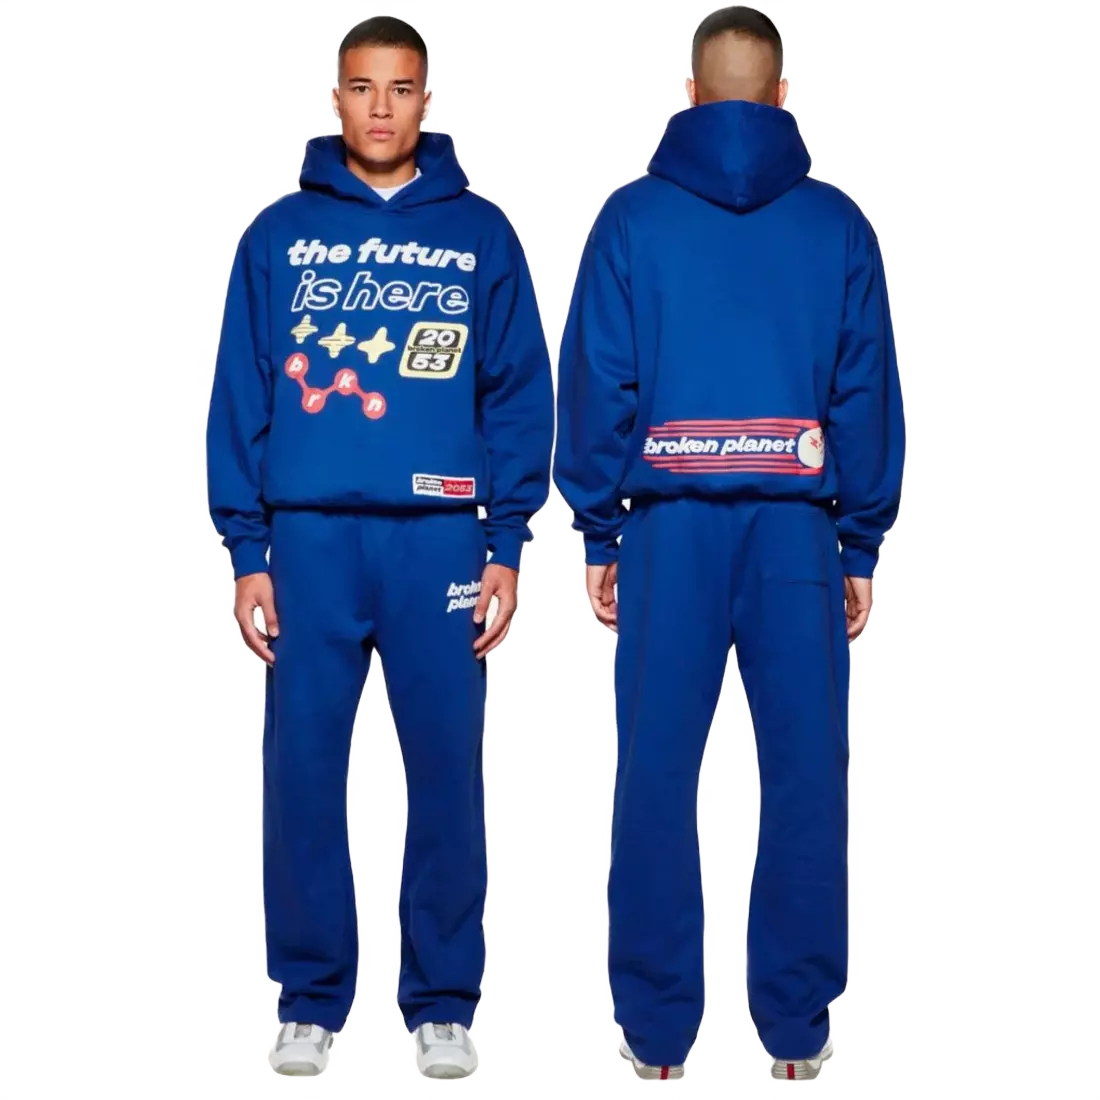 BROKEN PLANET MARKET “THE FUTURE IS HERE” TRACKSUIT